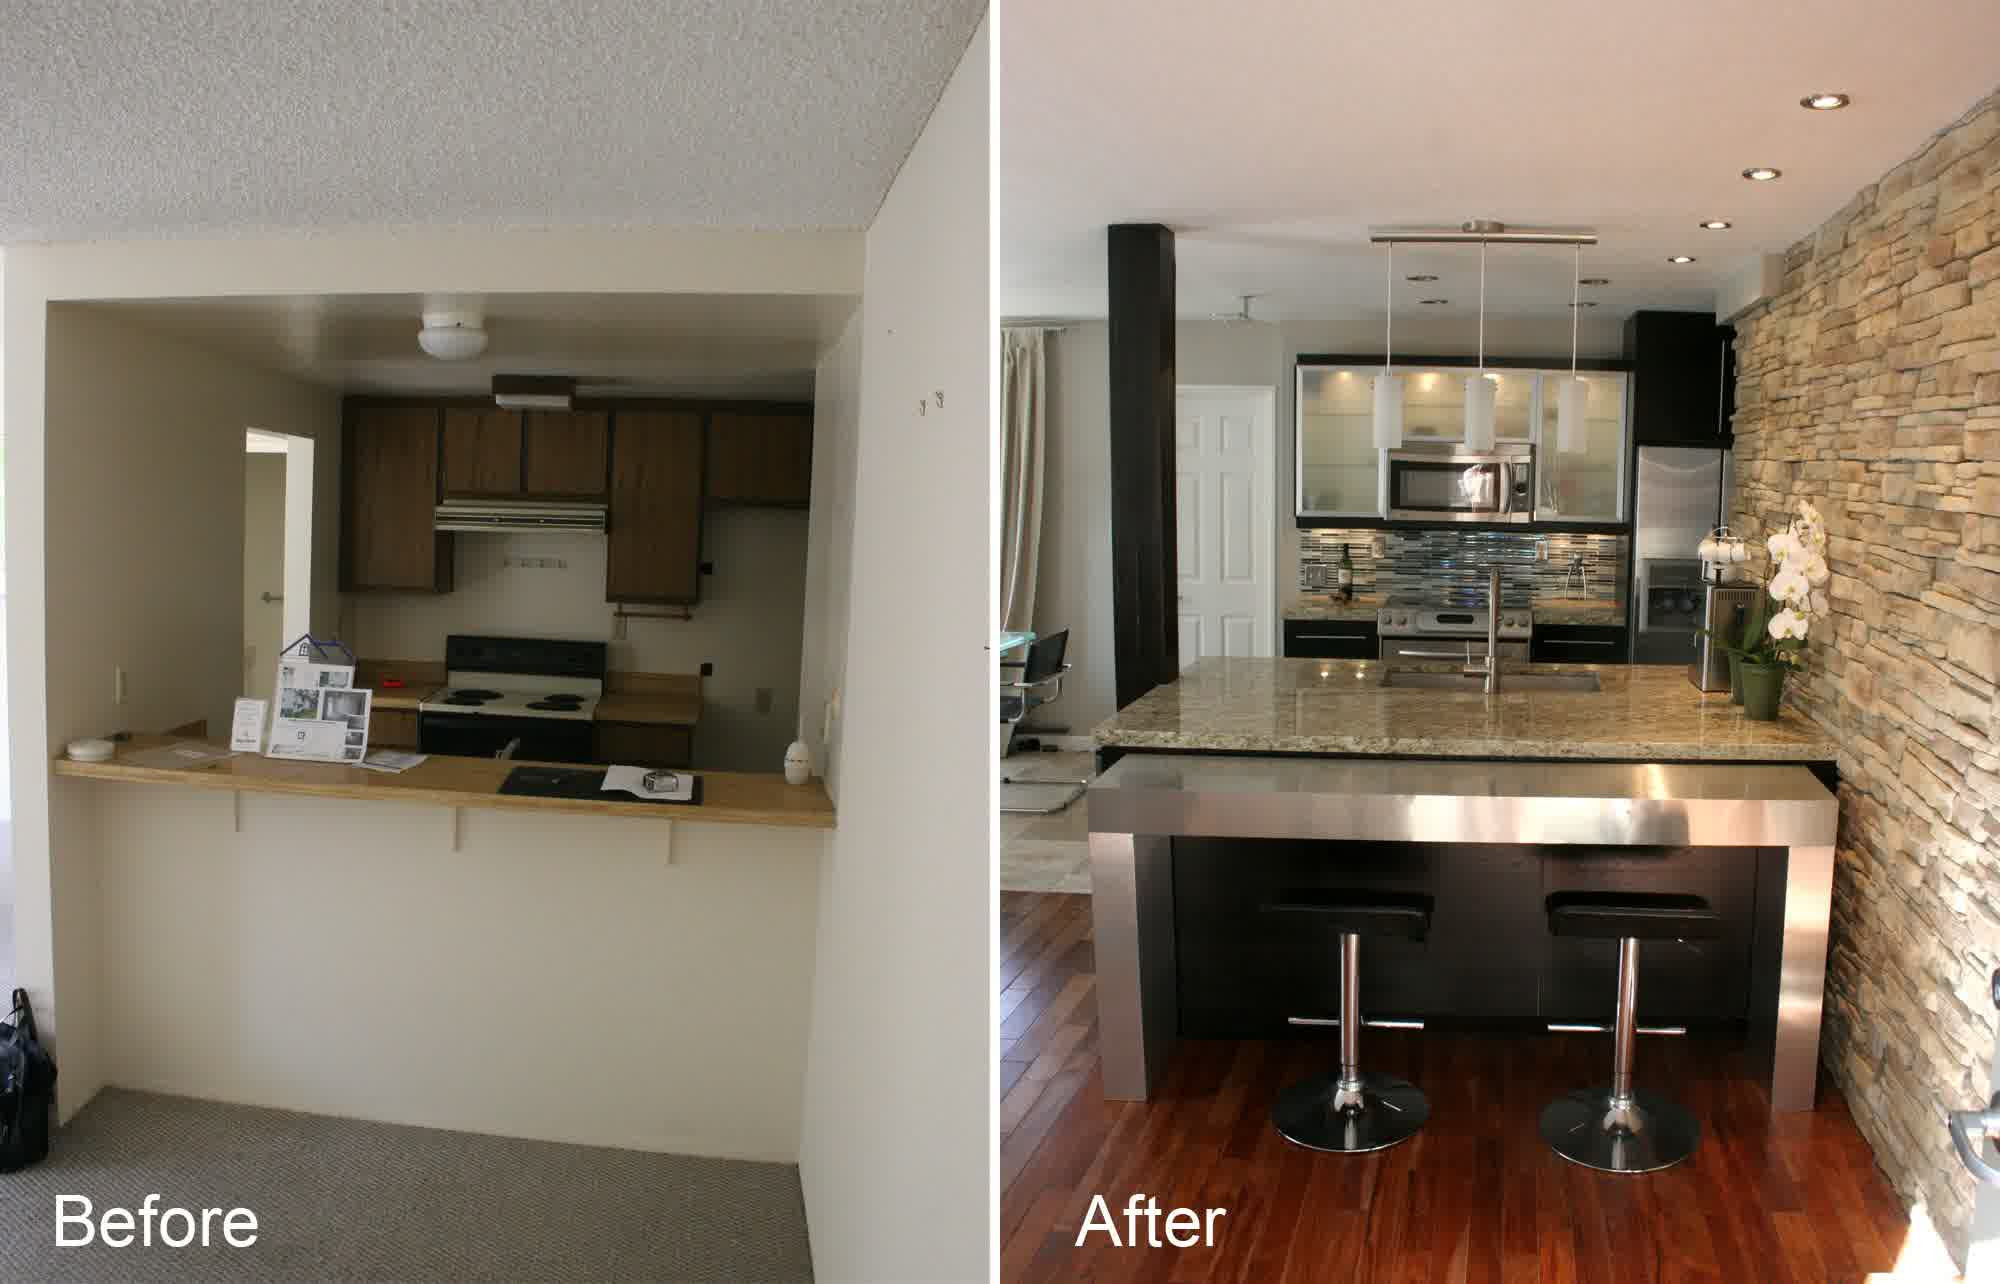 Kitchen Remodels Before And After
 Small Kitchen Remodel Before and After for Stunning and